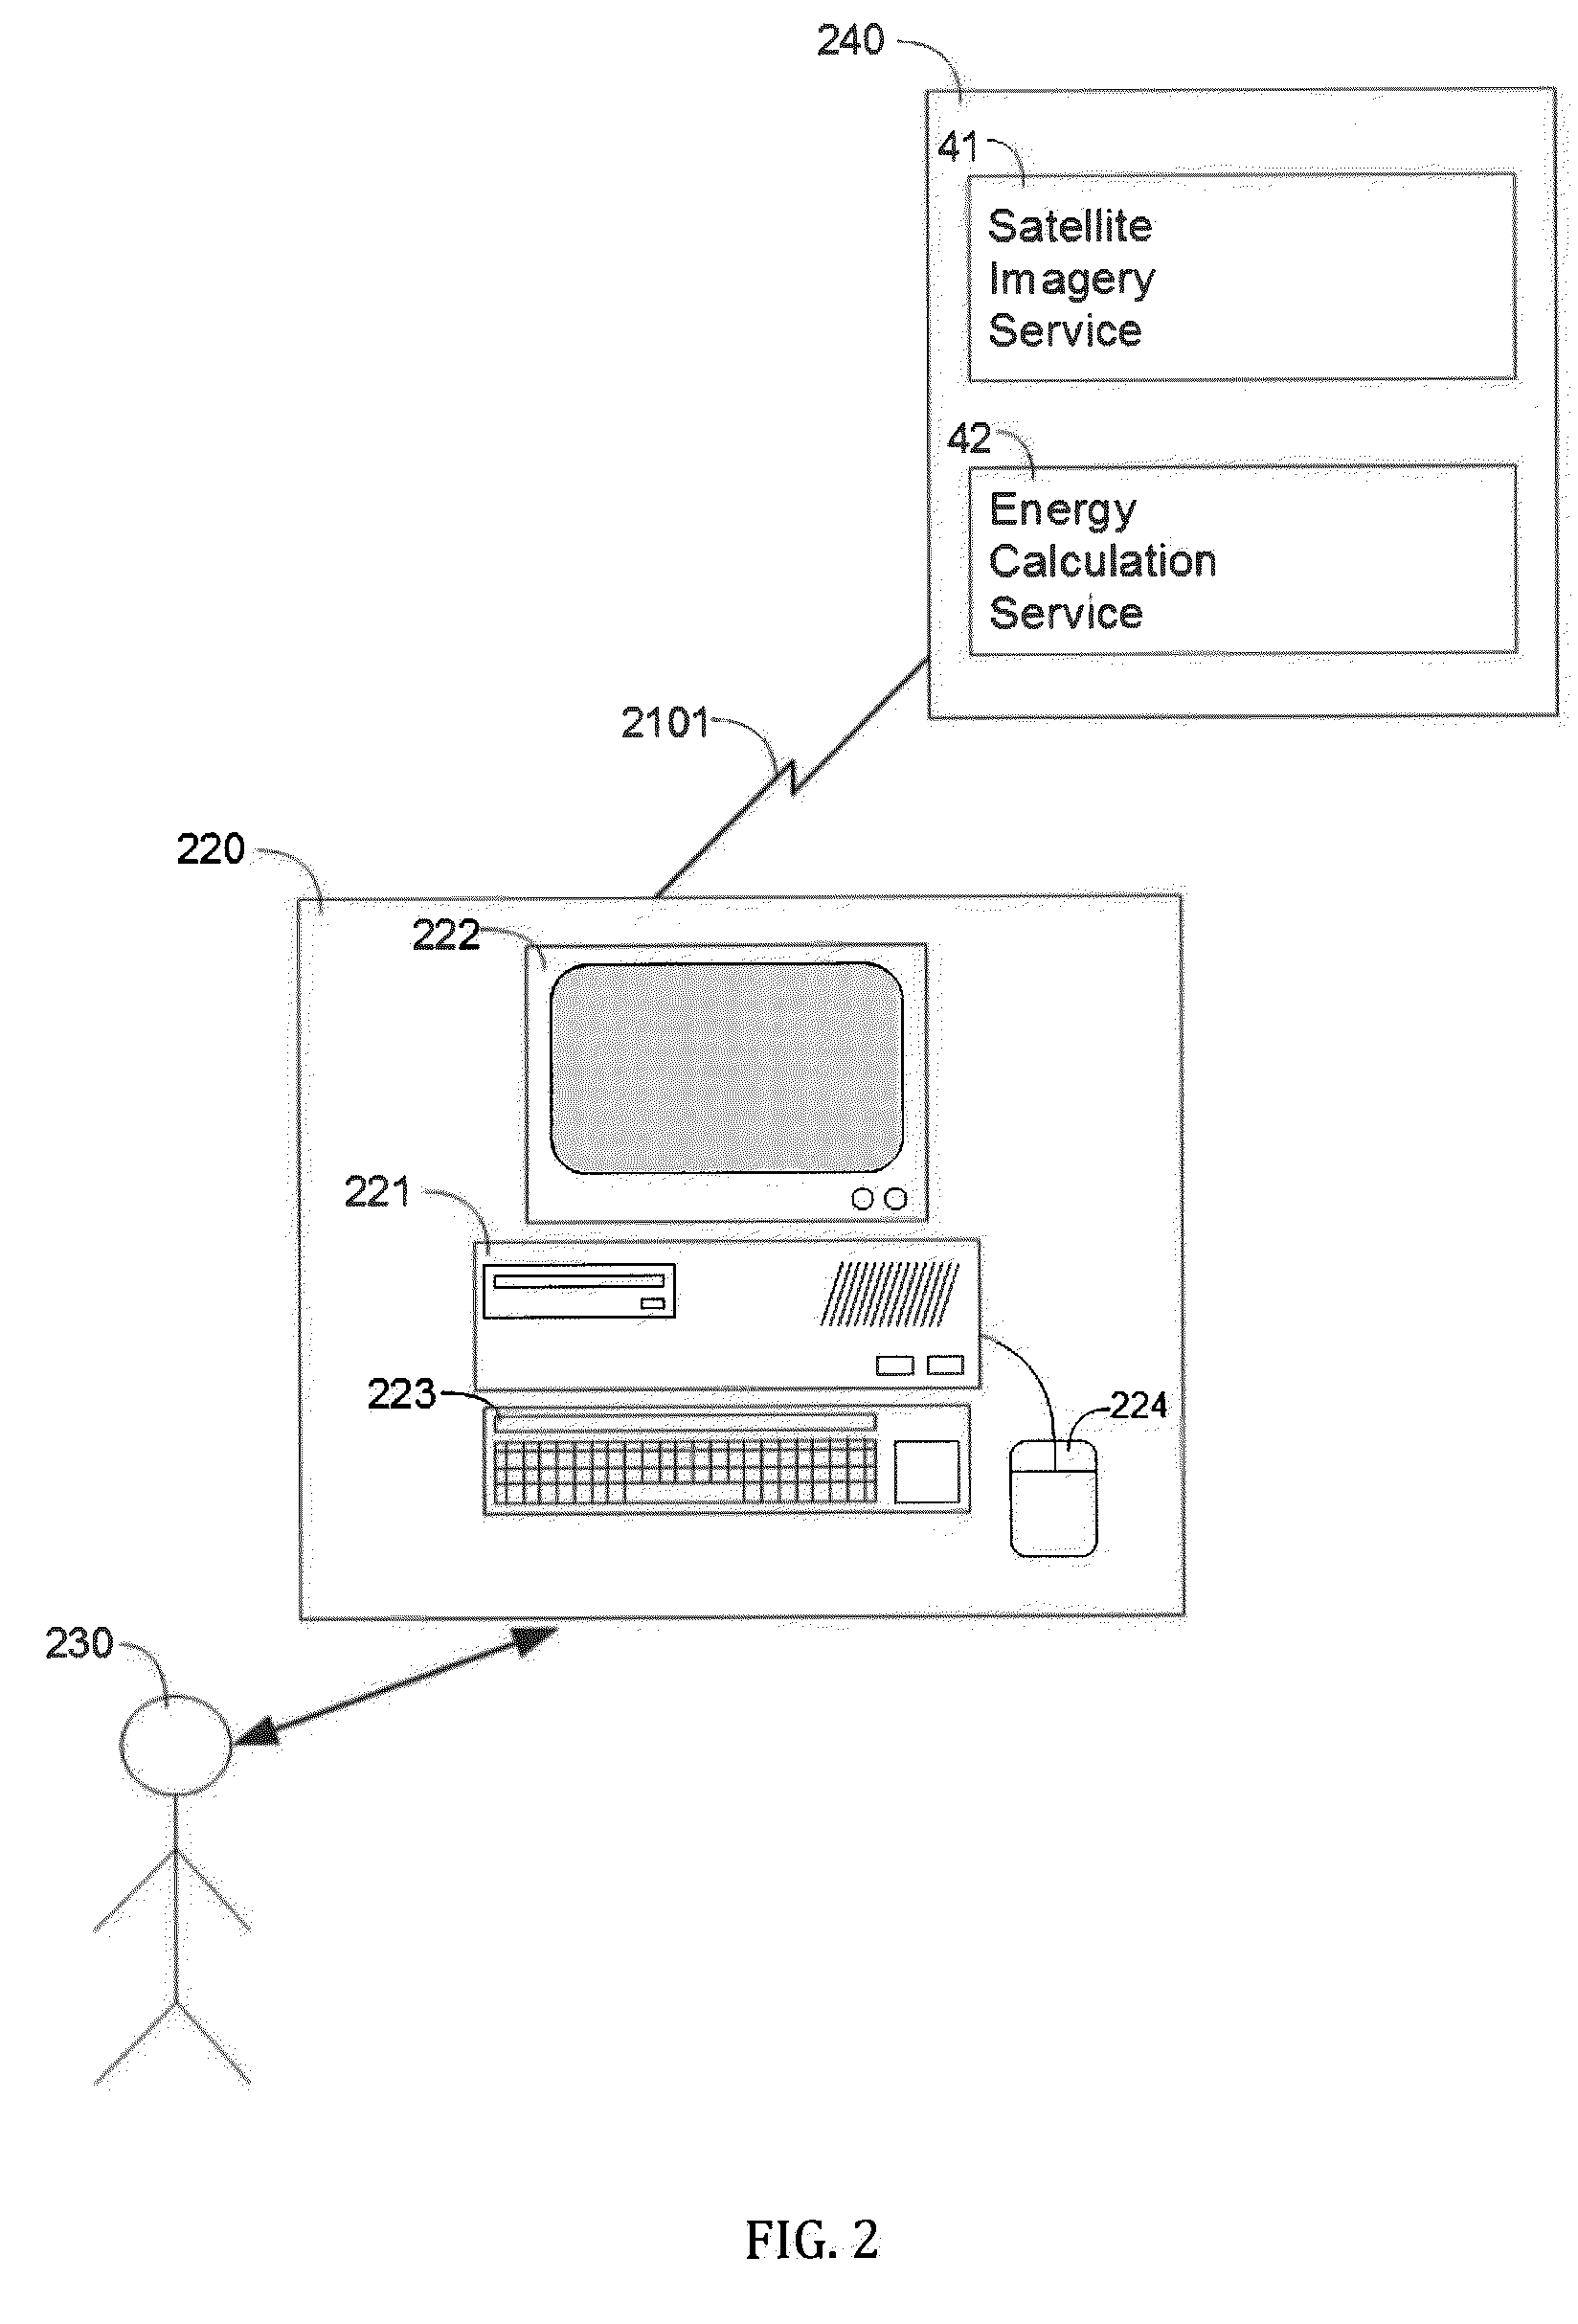 System and Method for Optimized Automated Layout of Solar Panels